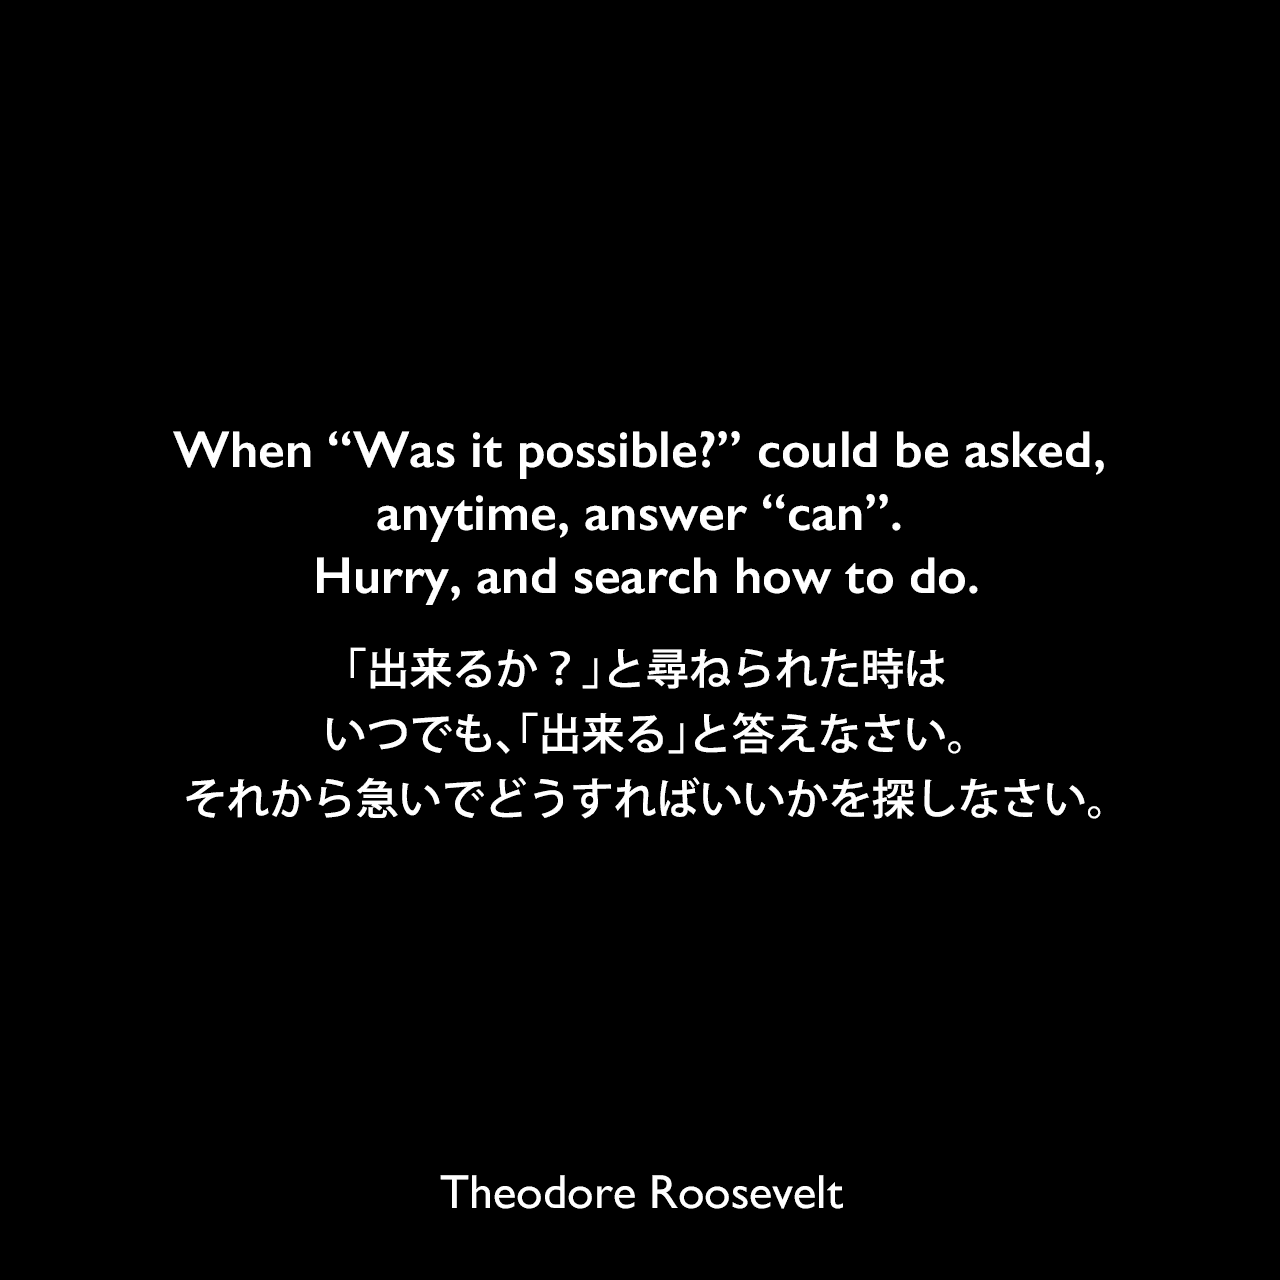 When “Was it possible?” could be asked, anytime, answer “can”. Hurry, and search how to do.「出来るか？」と尋ねられた時はいつでも、「出来る」と答えなさい。それから急いでどうすればいいかを探しなさい。Theodore Roosevelt